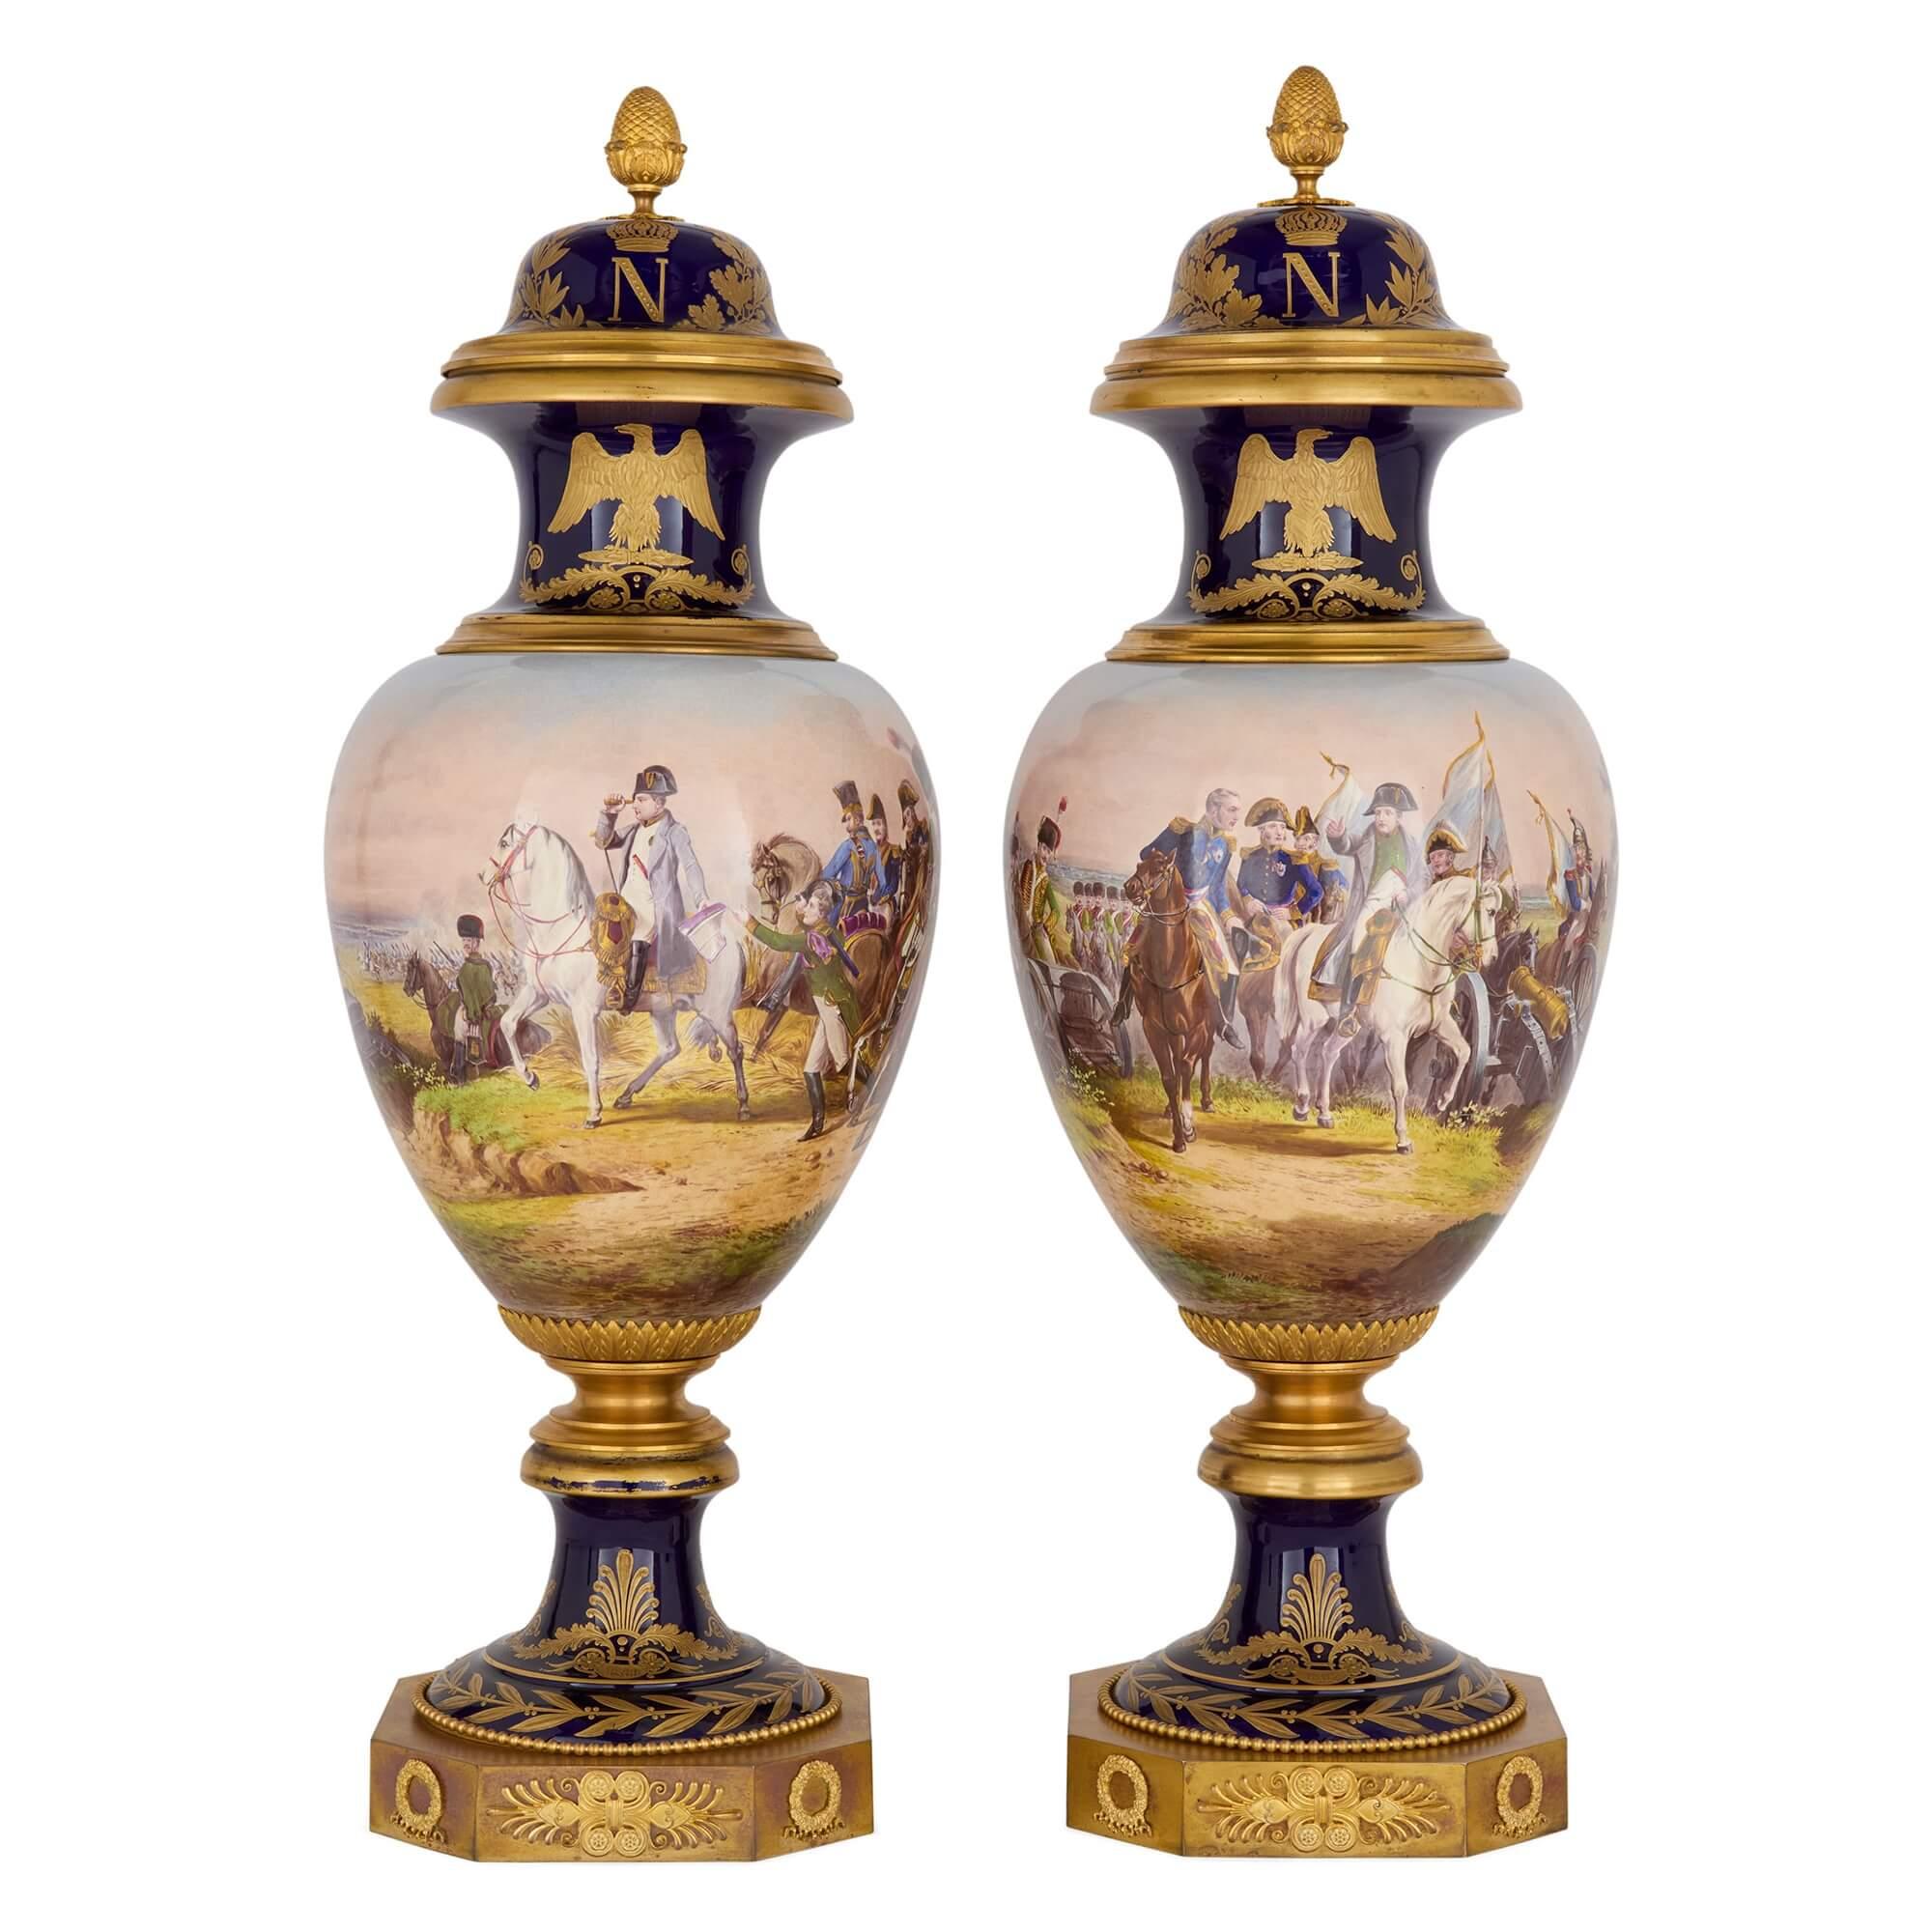 Large pair of Sèvres-style porcelain Napoleonic vases with ormolu mounts
French, Late 19th Century
Height 96cm, diameter 33cm

Standing just below a metre in height, these impressive vases are decorated with scenes of Napoleonic victory. The pieces